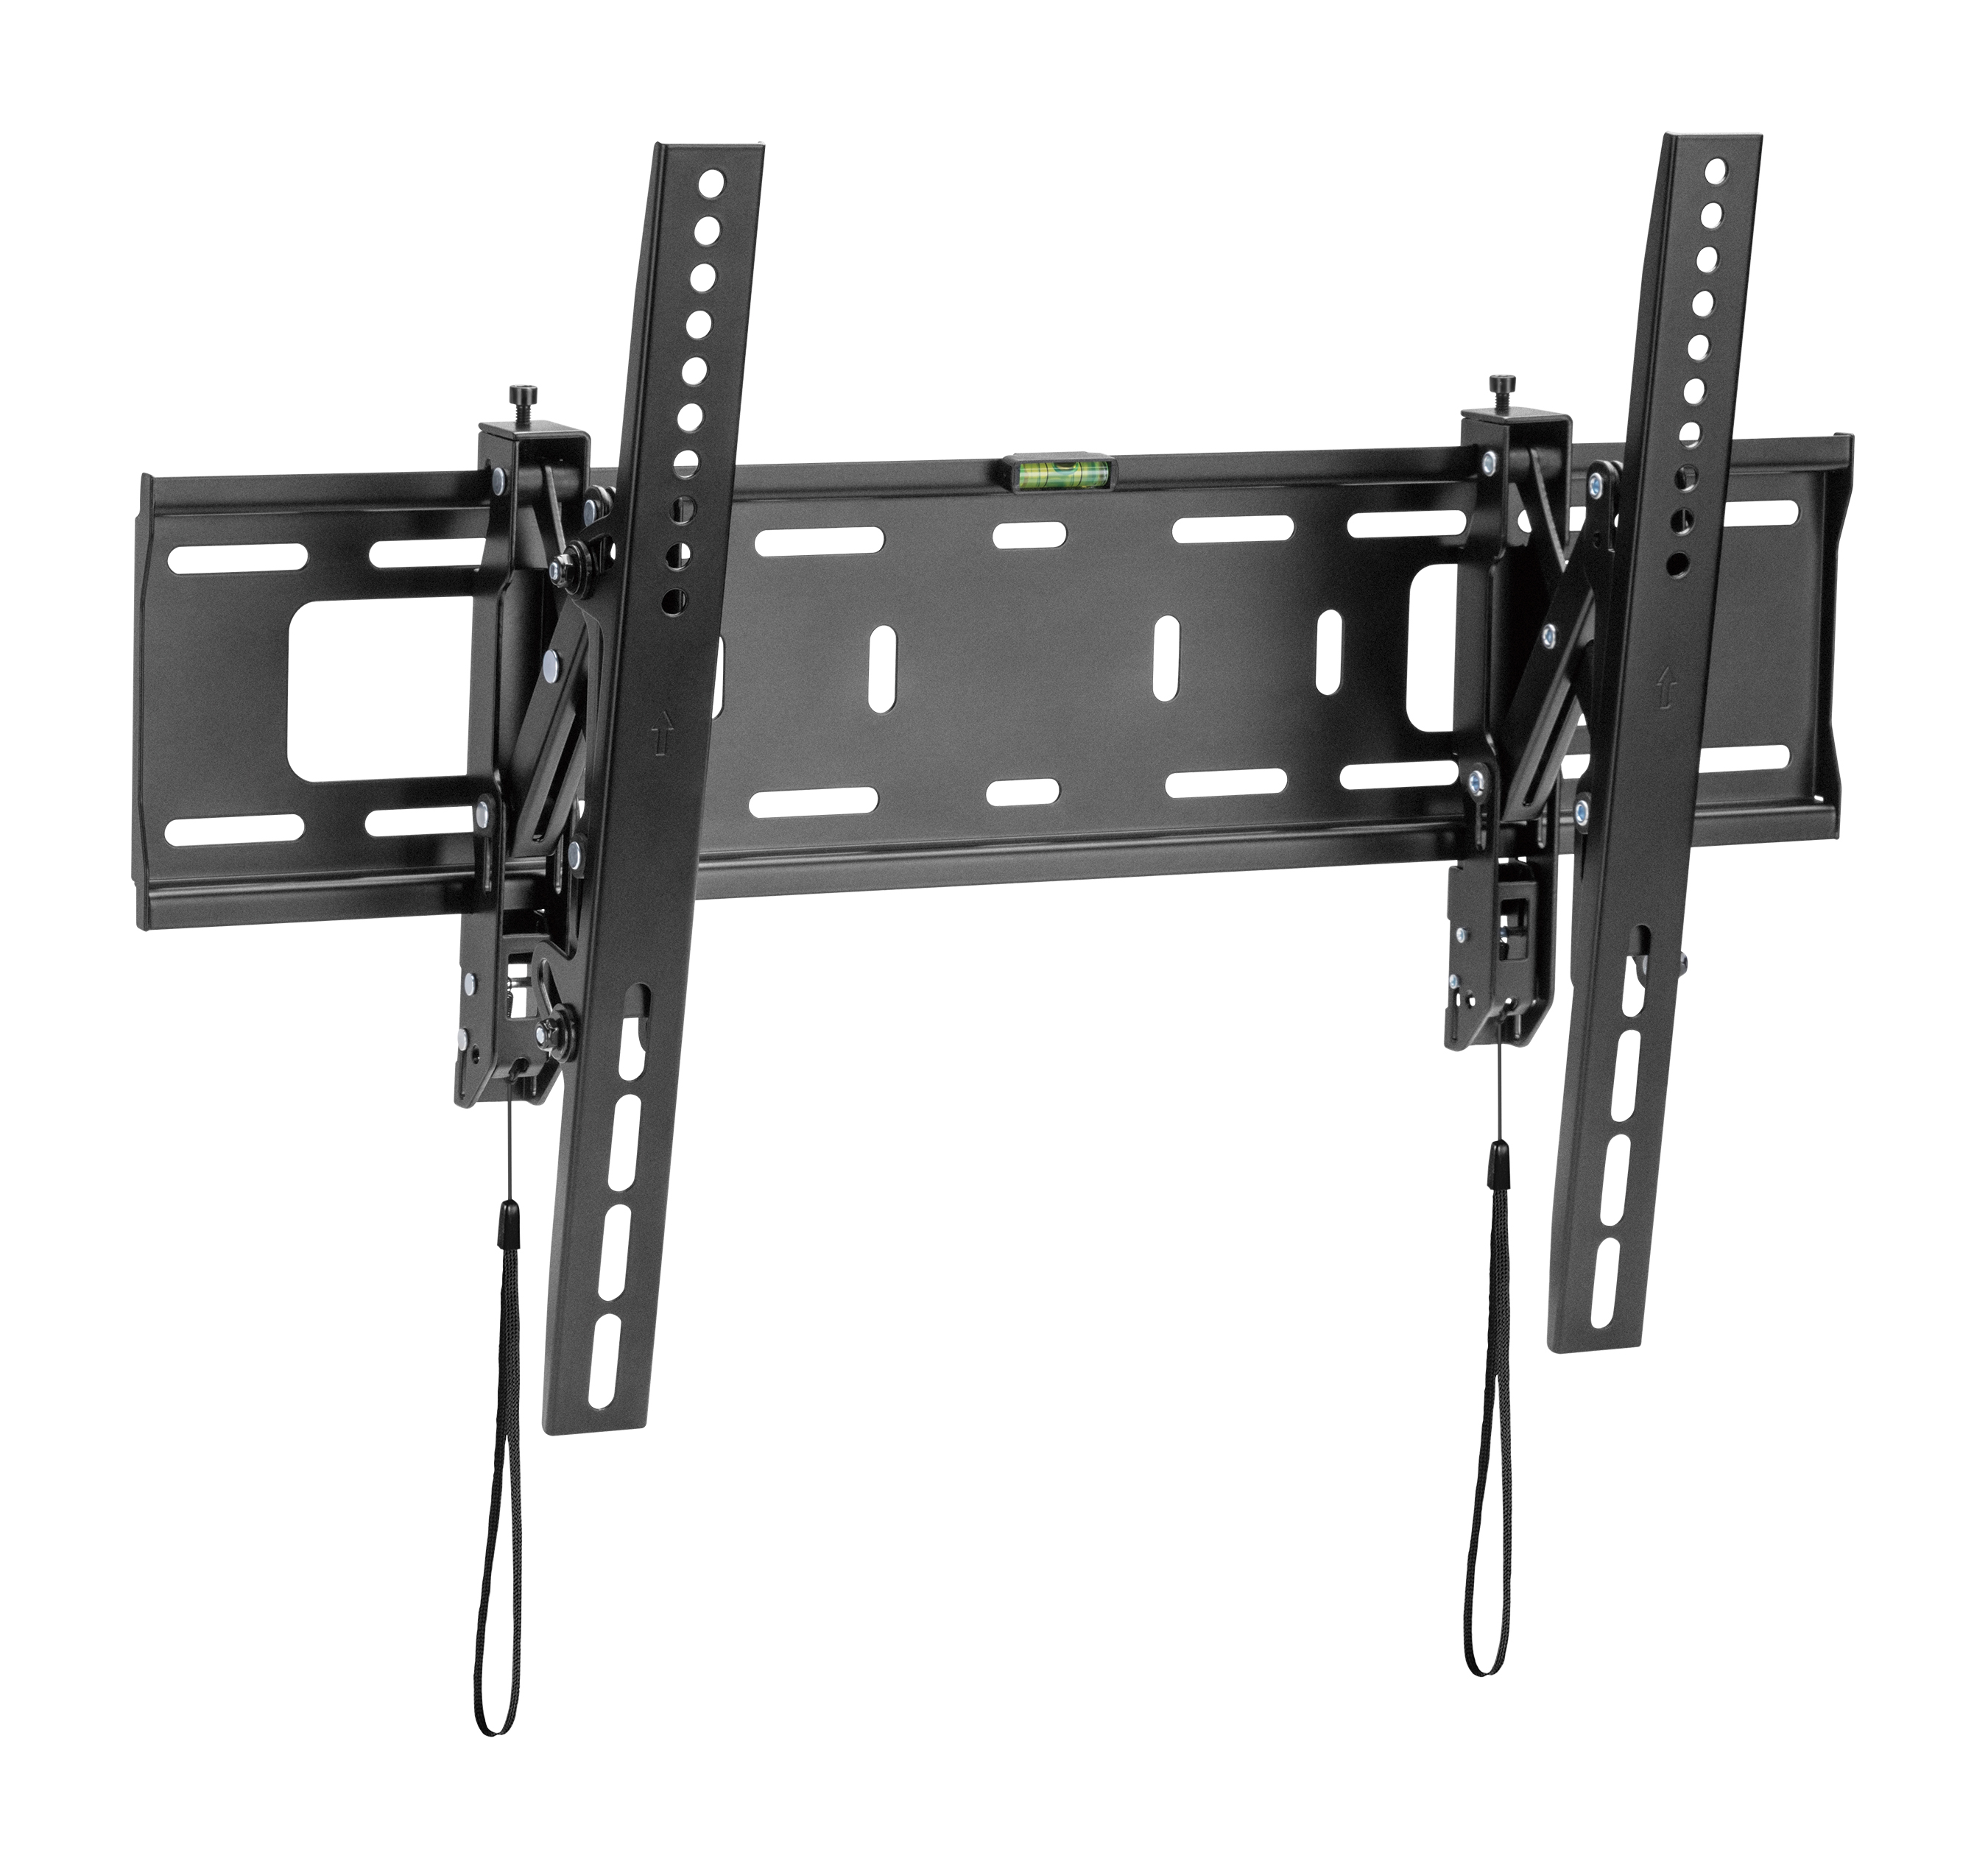 PT670 Paramount Universal Tilt Wall Mount for 37" to 85"+ Displays